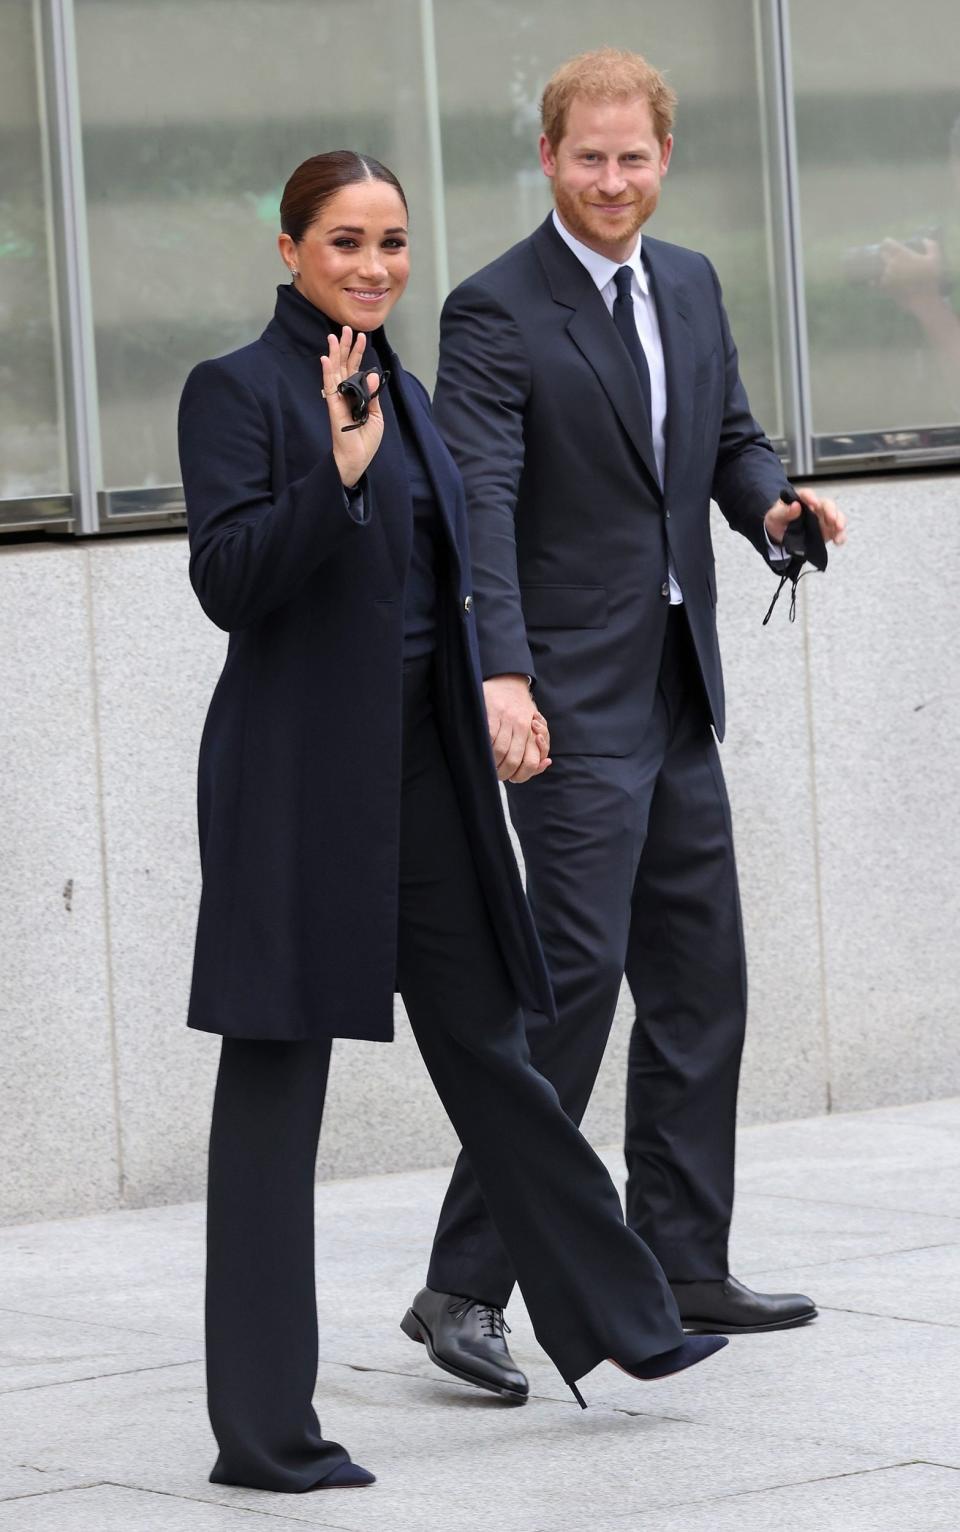 The Sussexes, who welcomed baby daughter Lili in June, are in New York to take part in a worldwide event on Saturday urging leaders to adopt a vaccine equity policy to help end the Covid-19 pandemic - WireImage 